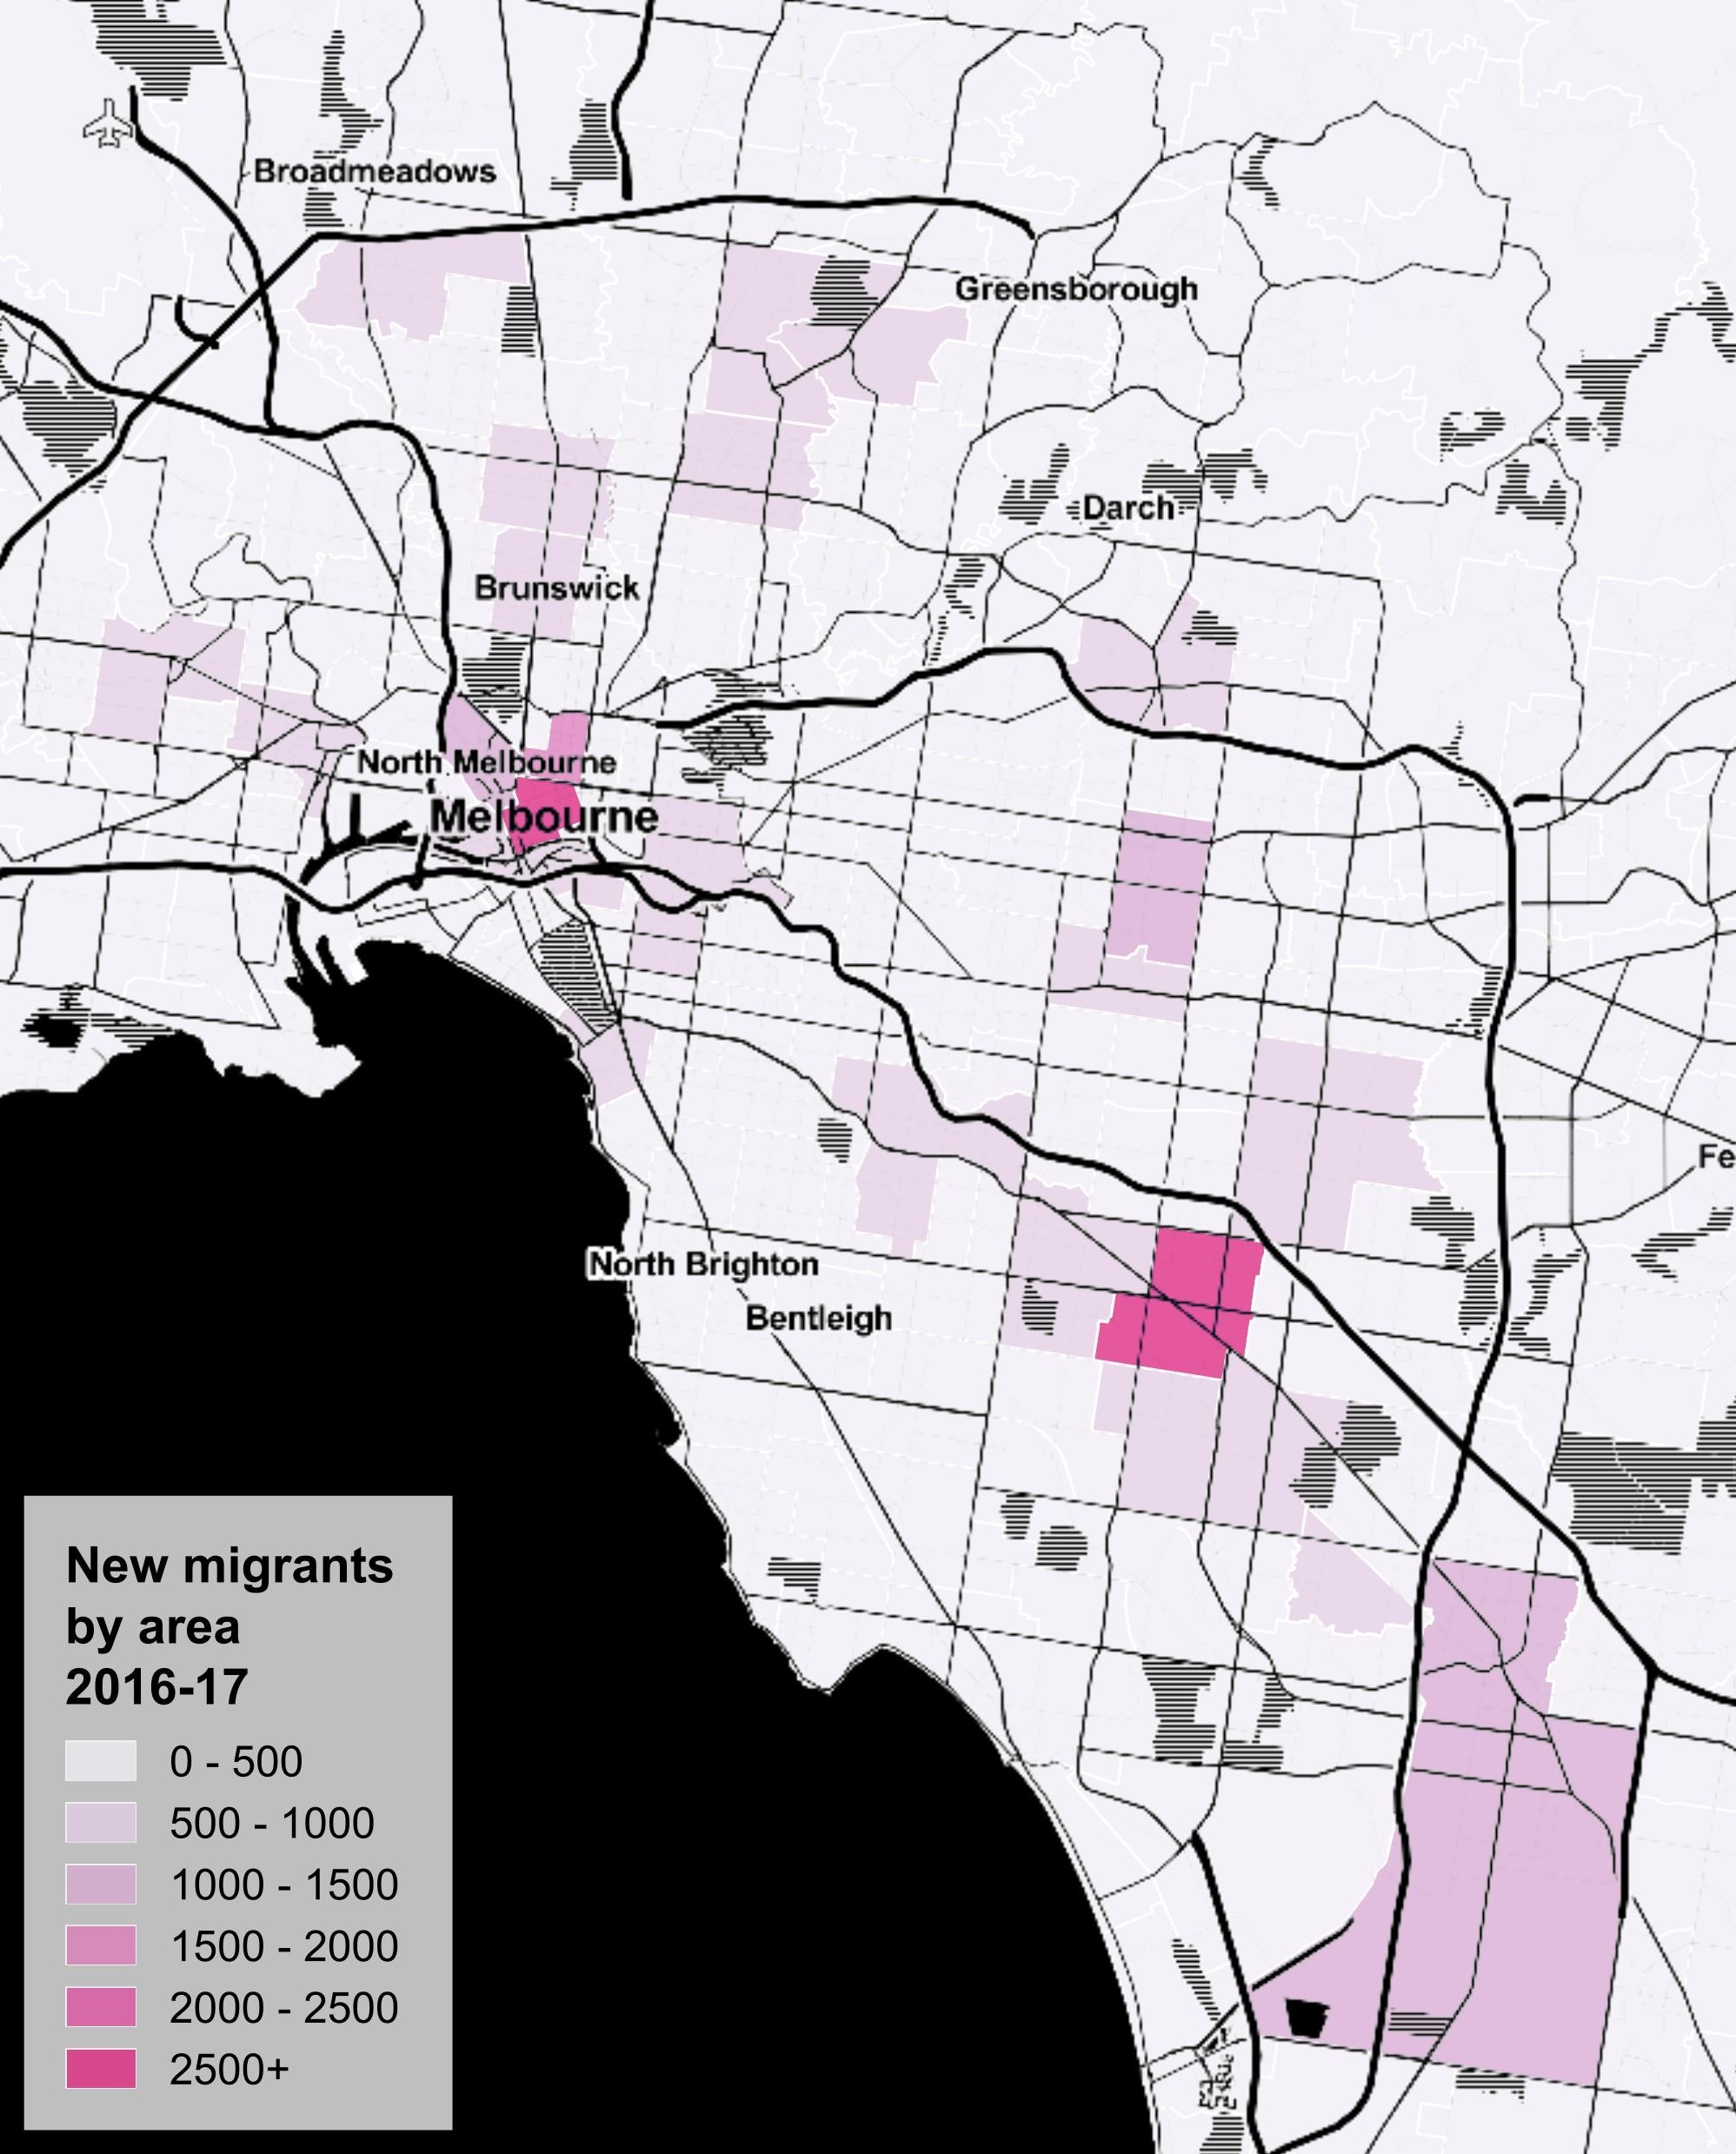 Map of Melbourne showing high numbers of migrants settling in the CBD and Clayton